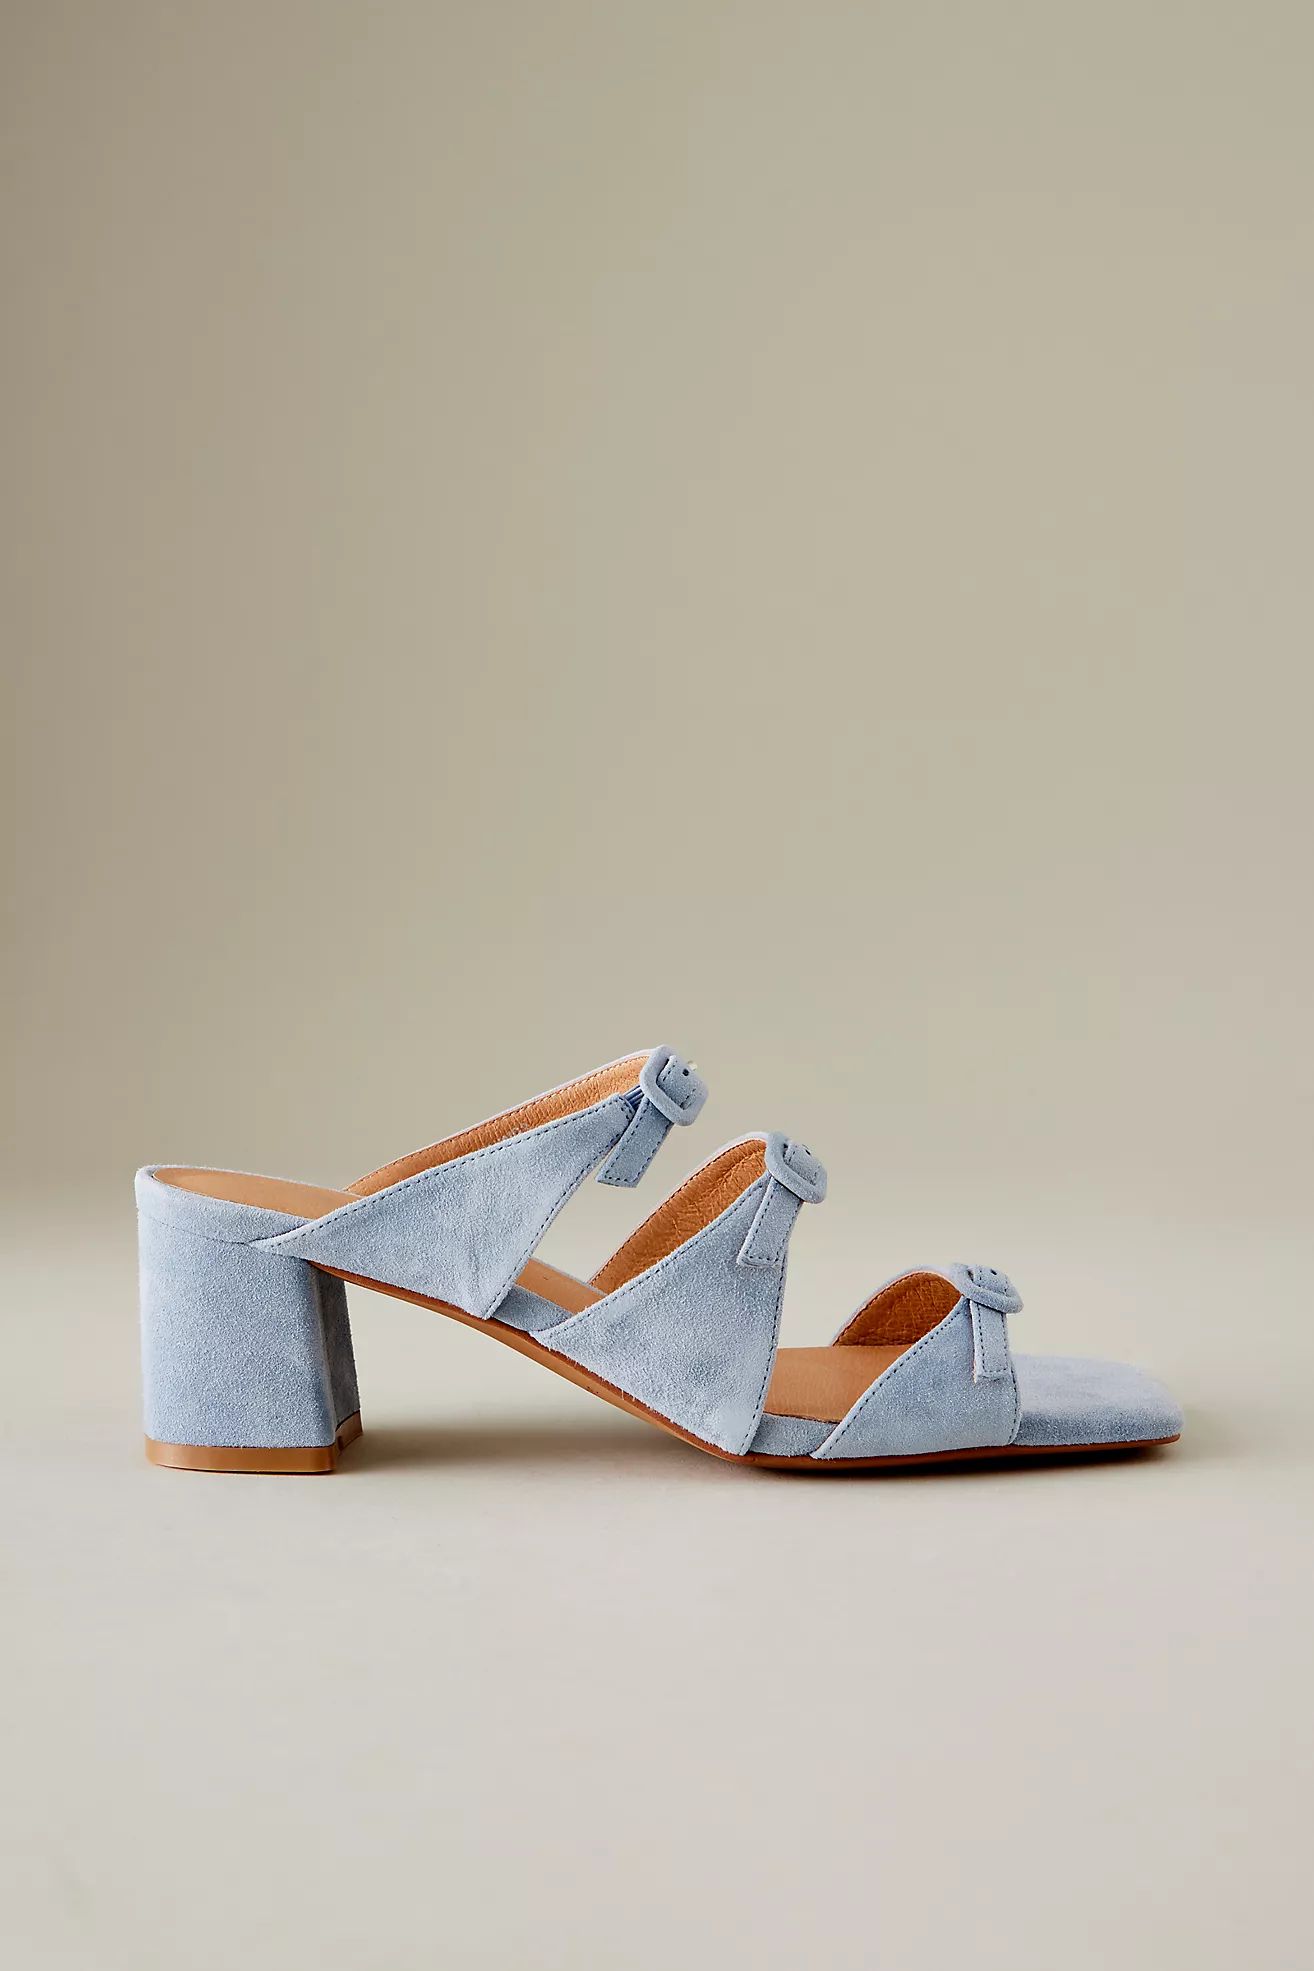 Shoe The Bear Strappy Open-Toe Mules | Anthropologie (UK)